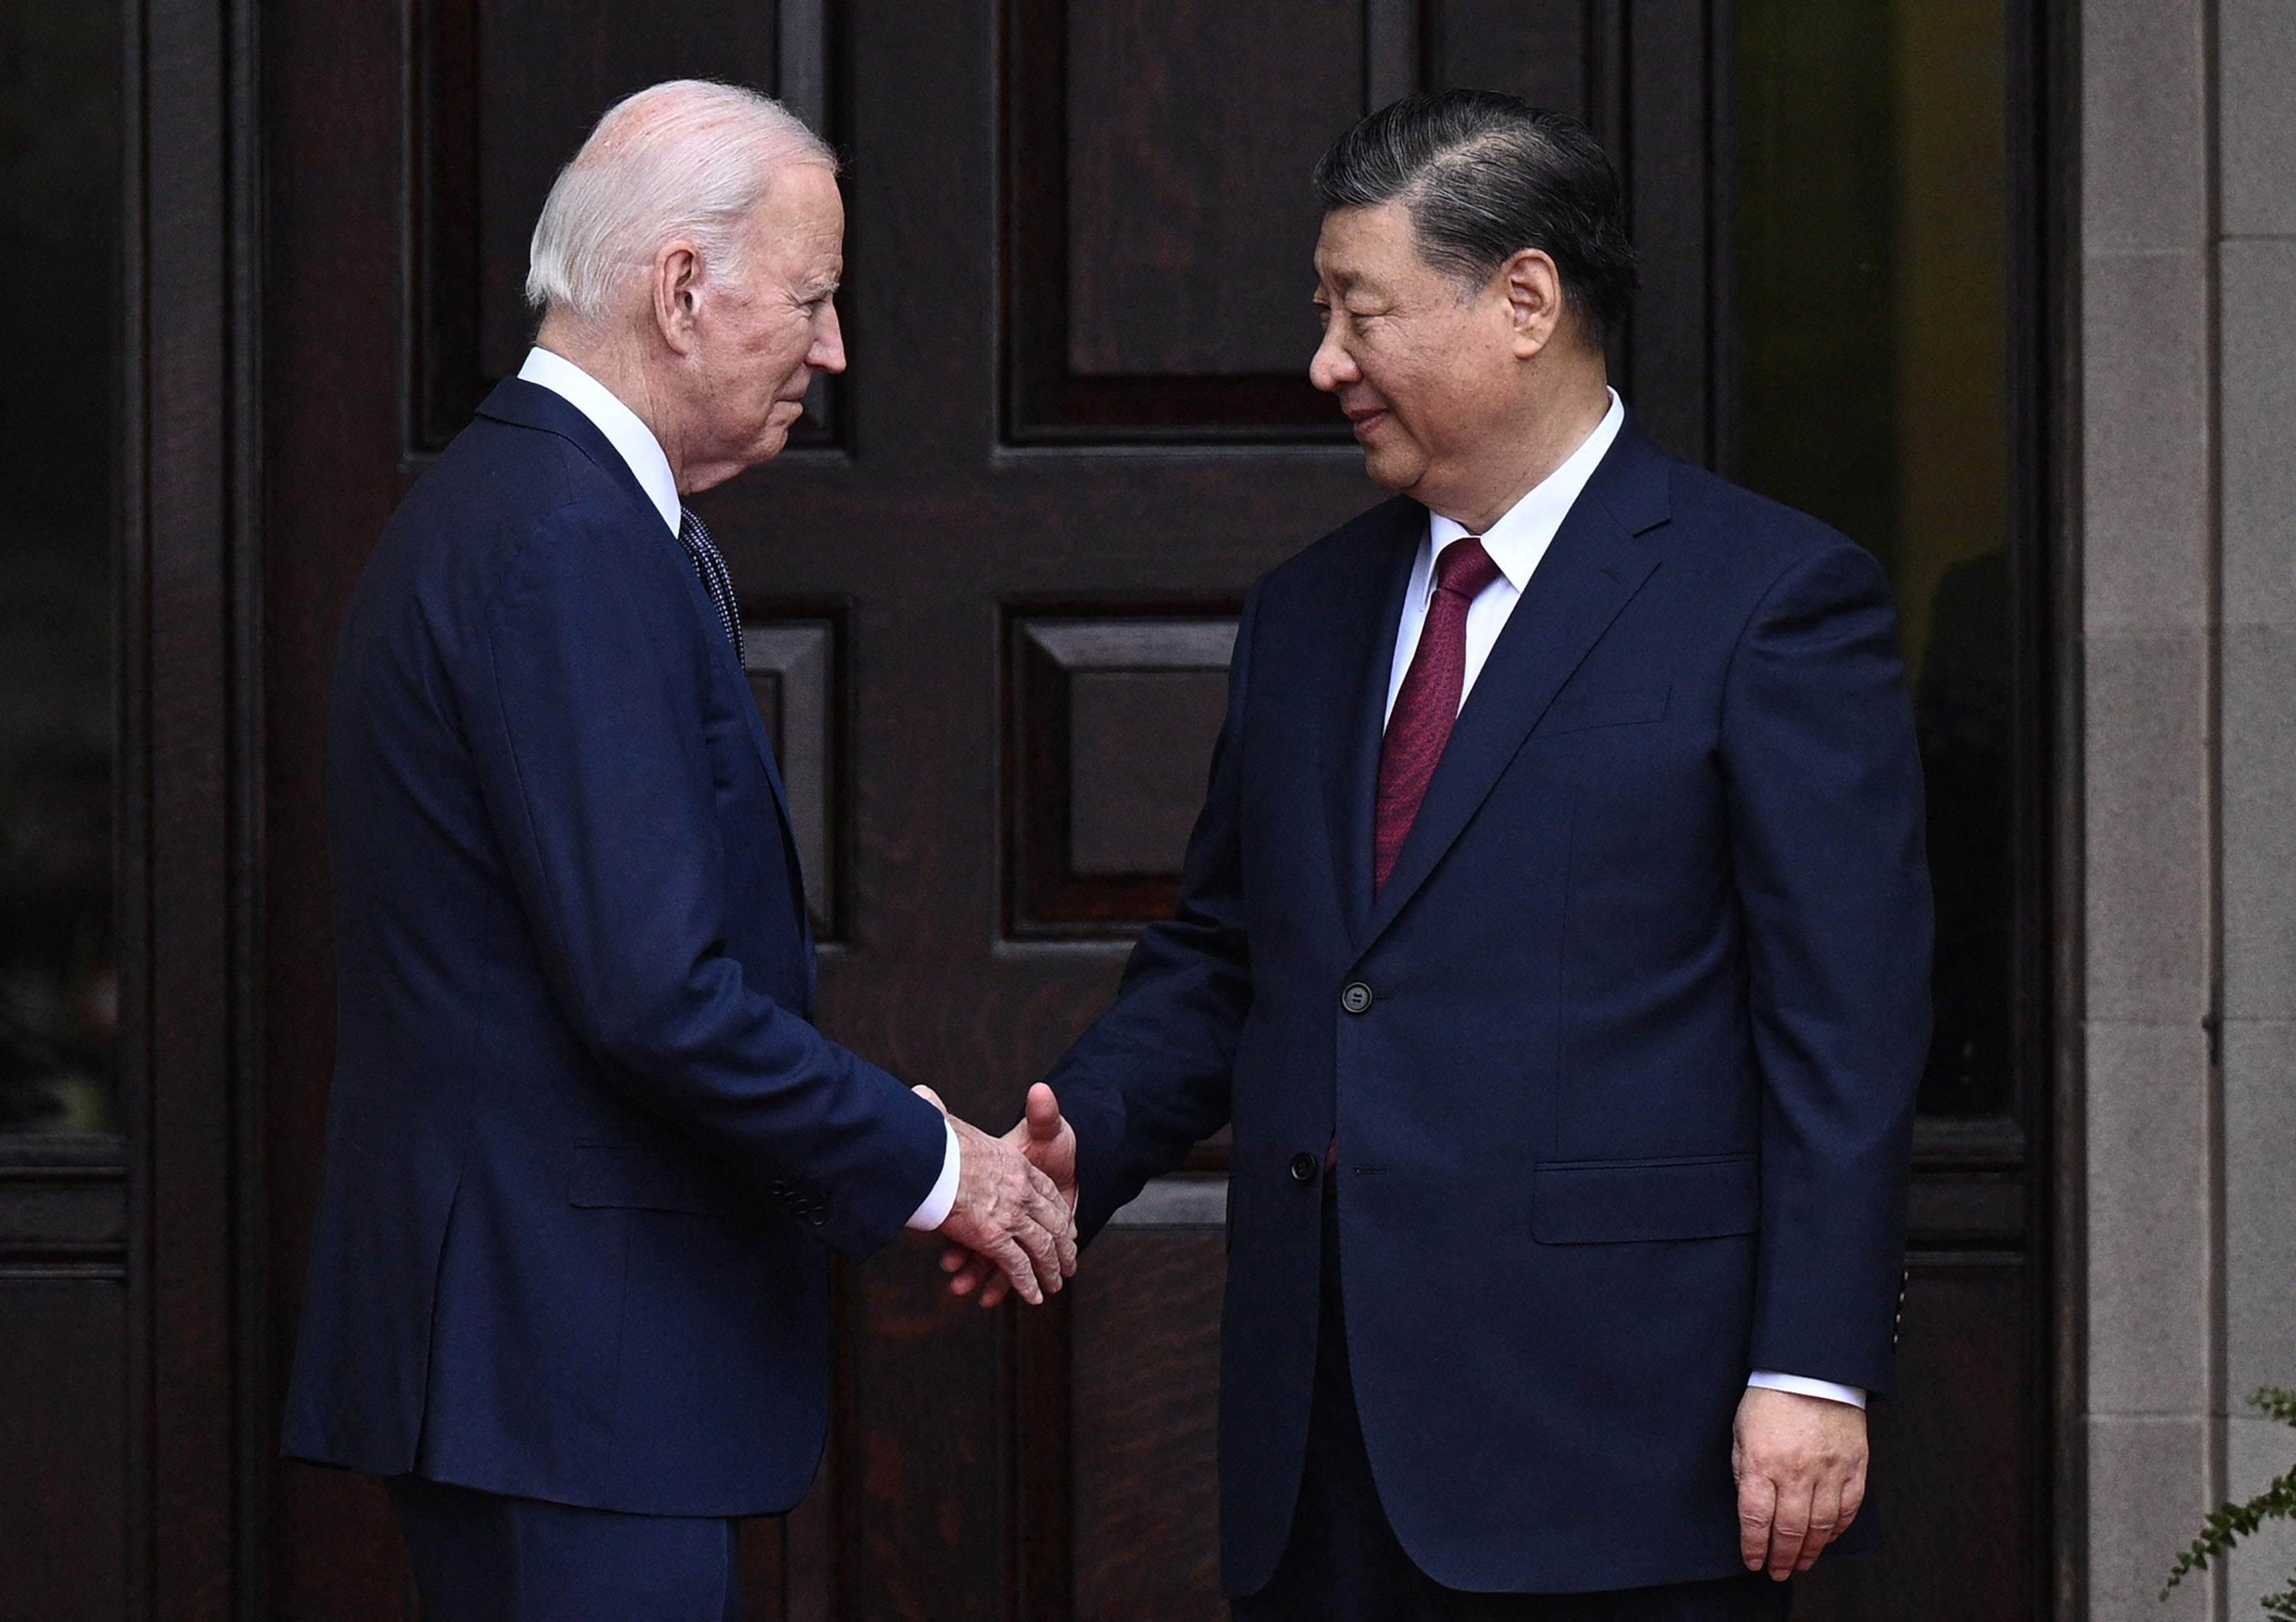 US President Joe Biden greets Chinese President Xi Jinping before a meeting during the Asia-Pacific Economic Cooperation (APEC) Leaders' week in Woodside, California, on November 15.